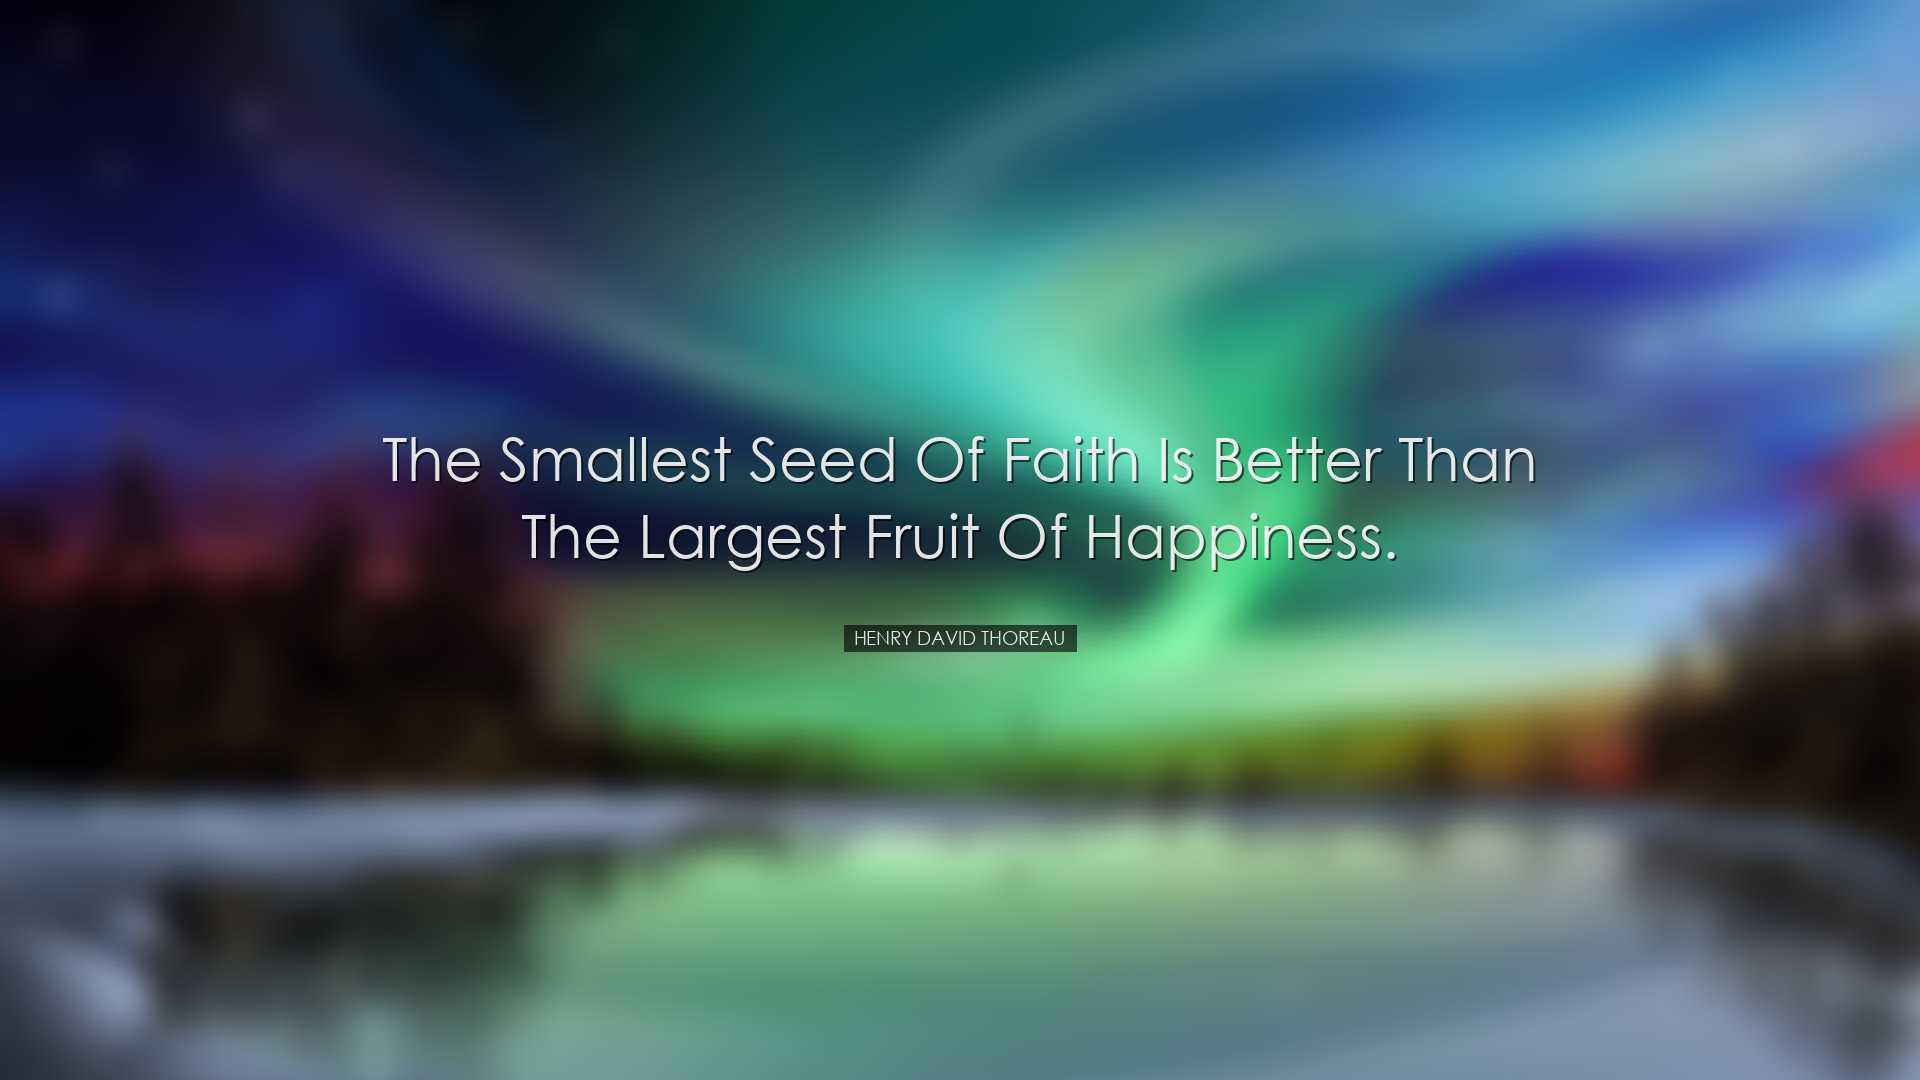 The smallest seed of faith is better than the largest fruit of hap